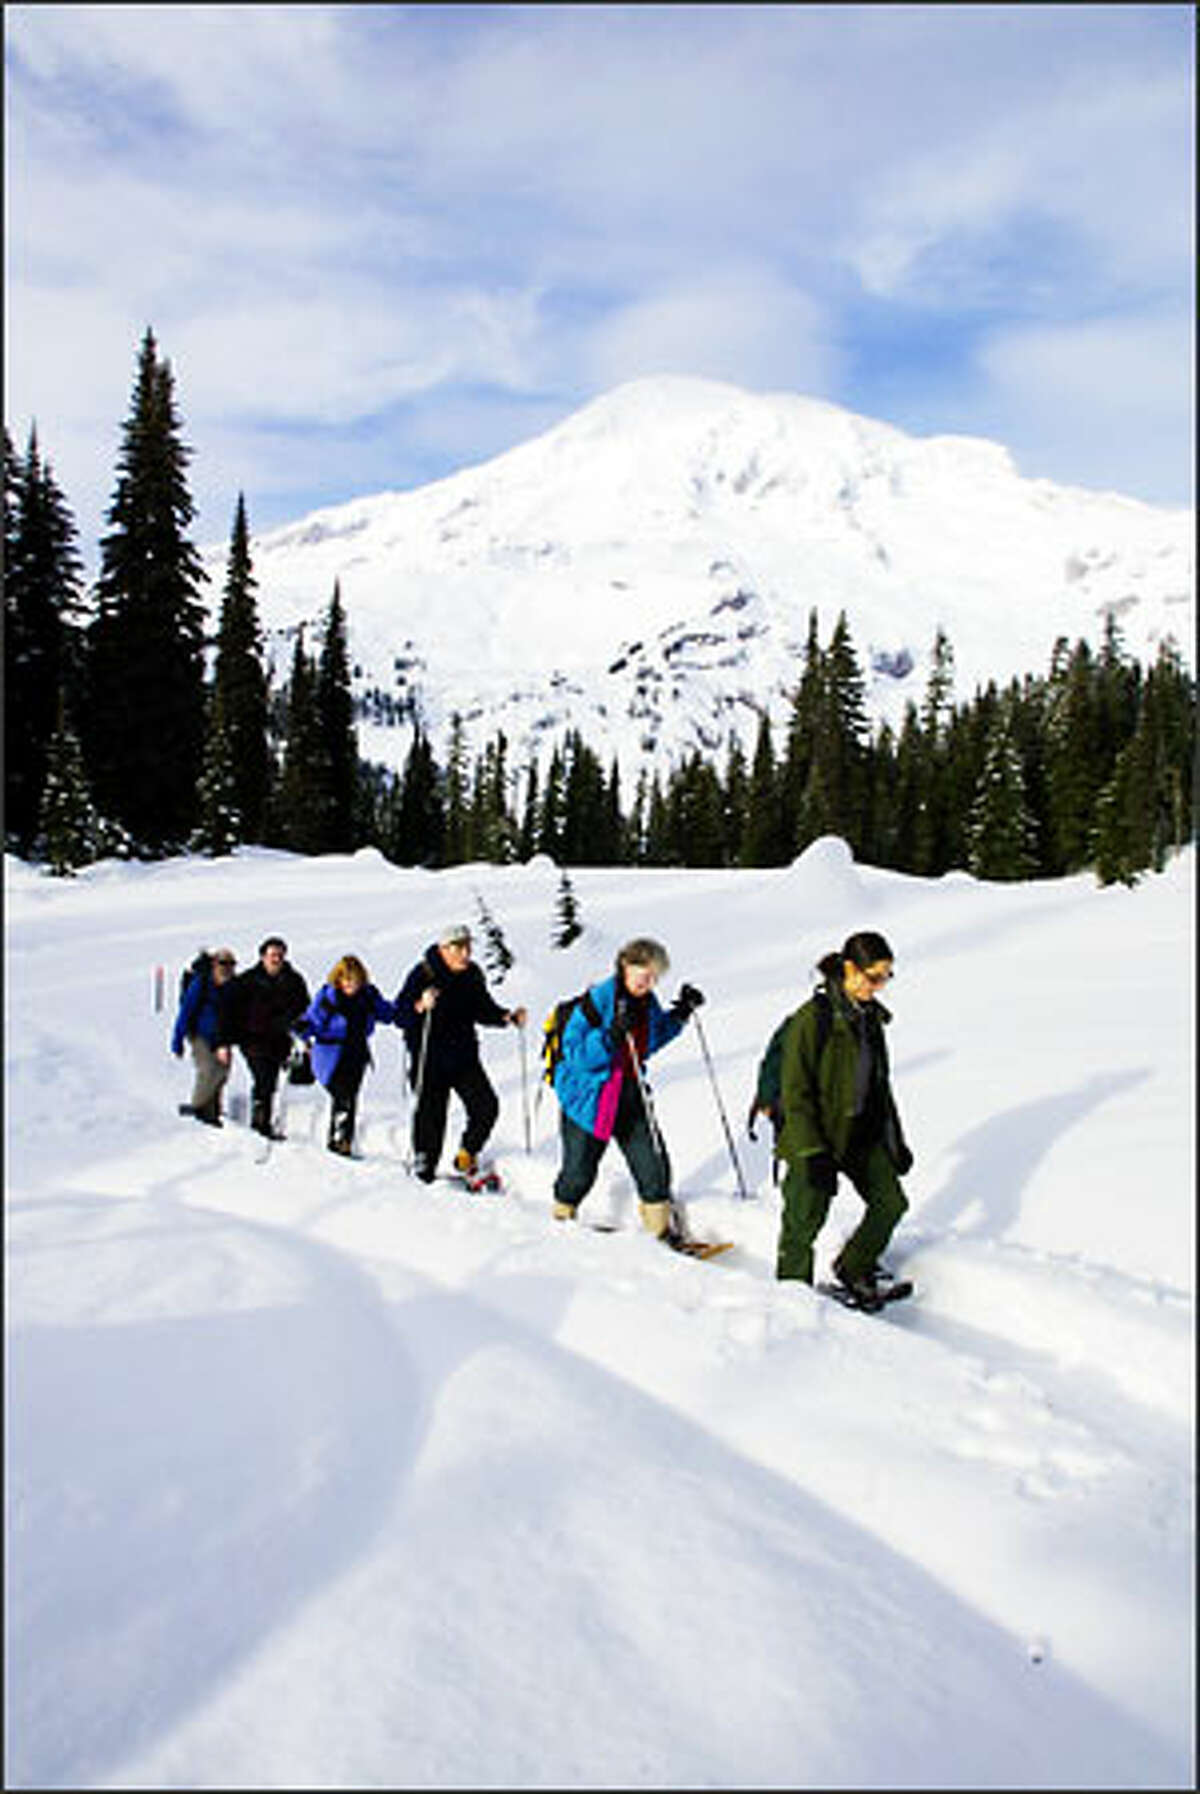 With Mount Rainier's summit in the background, ranger Dana Ostfeld leads a two-hour snowshoe walk from Paradise. U.S. Interior Secretary Ryan Zinke wants to charge $70 a carload for visitors during peak season at Mount Rainier National Park.